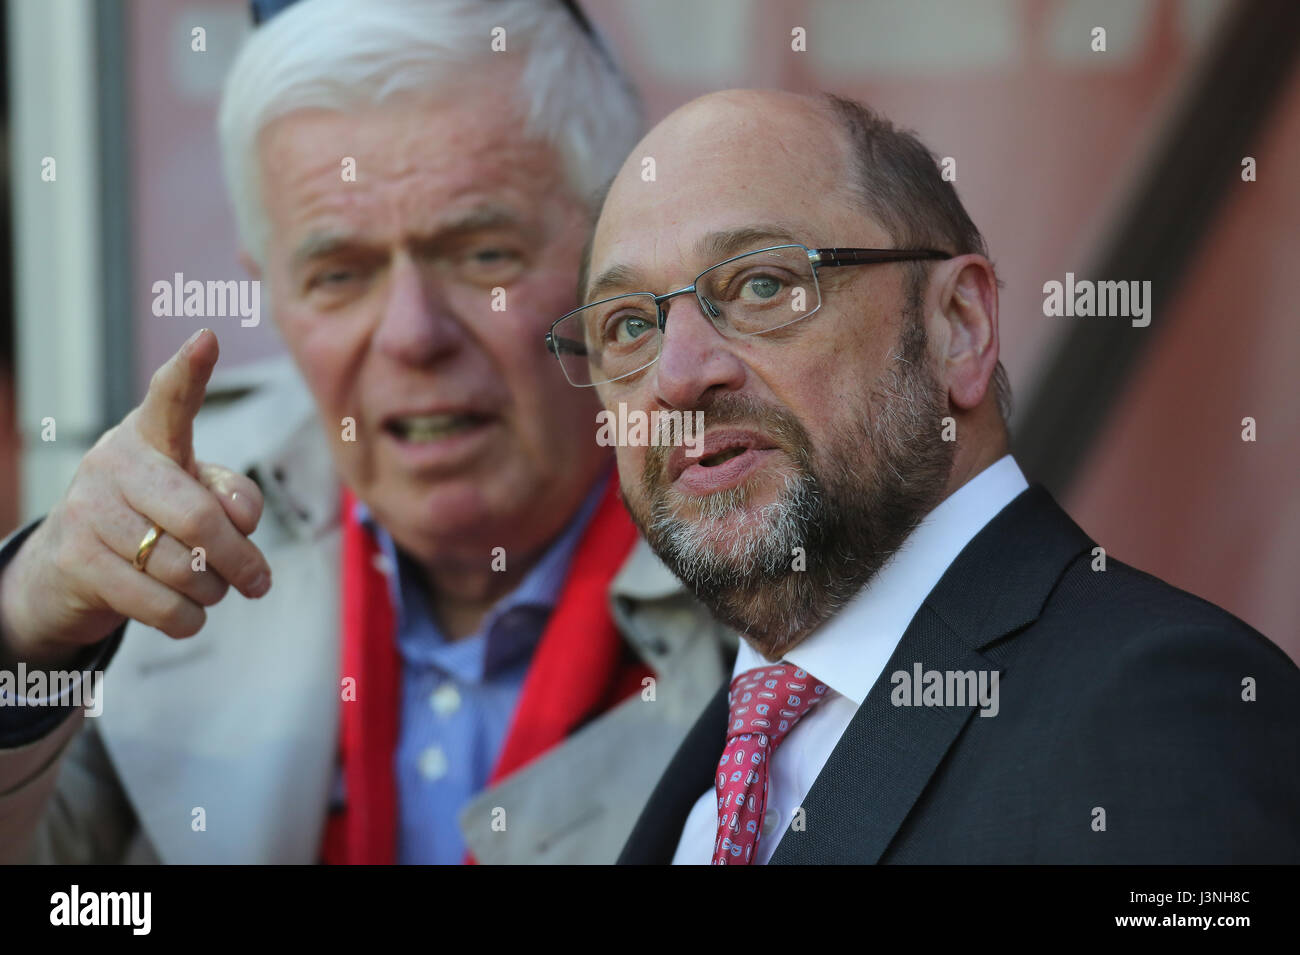 Cologne, Germany, 5th May 2017, Bundesliga matchday 32, 1. FC Koeln vs Werder Bremen: Social democratic candidate for Chancellorship Martin Schulz (R) stands beside FC Cologne club president Werner Spinner (Koeln).         Credit: Juergen Schwarz/Alamy Live News Stock Photo